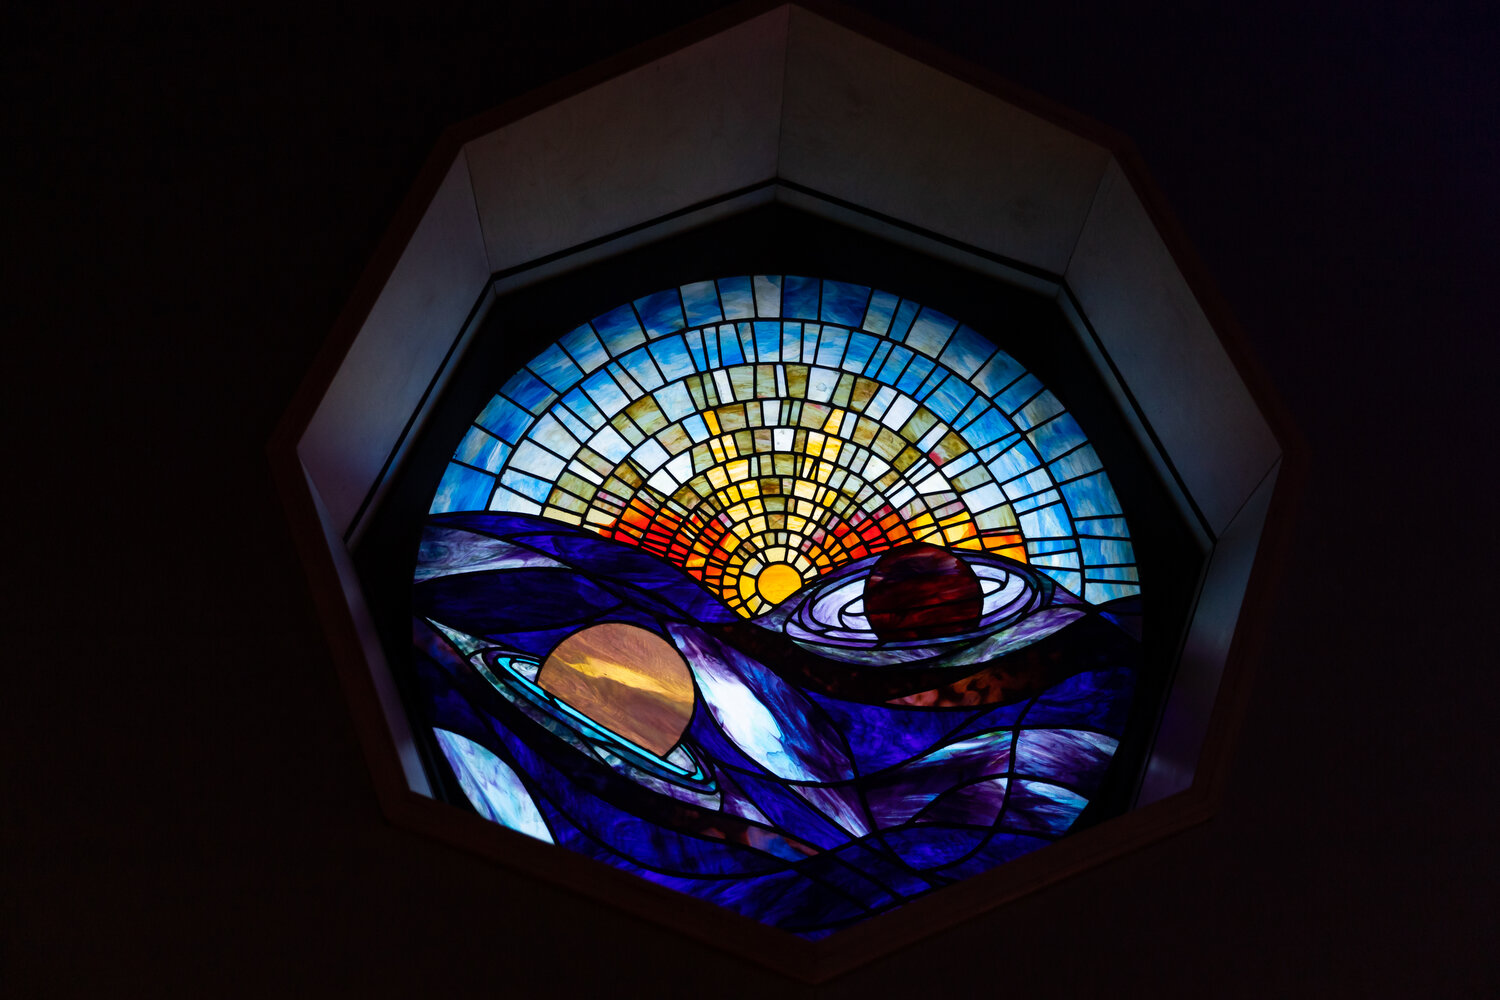 A spherical ceiling stained glass display of a solar system.